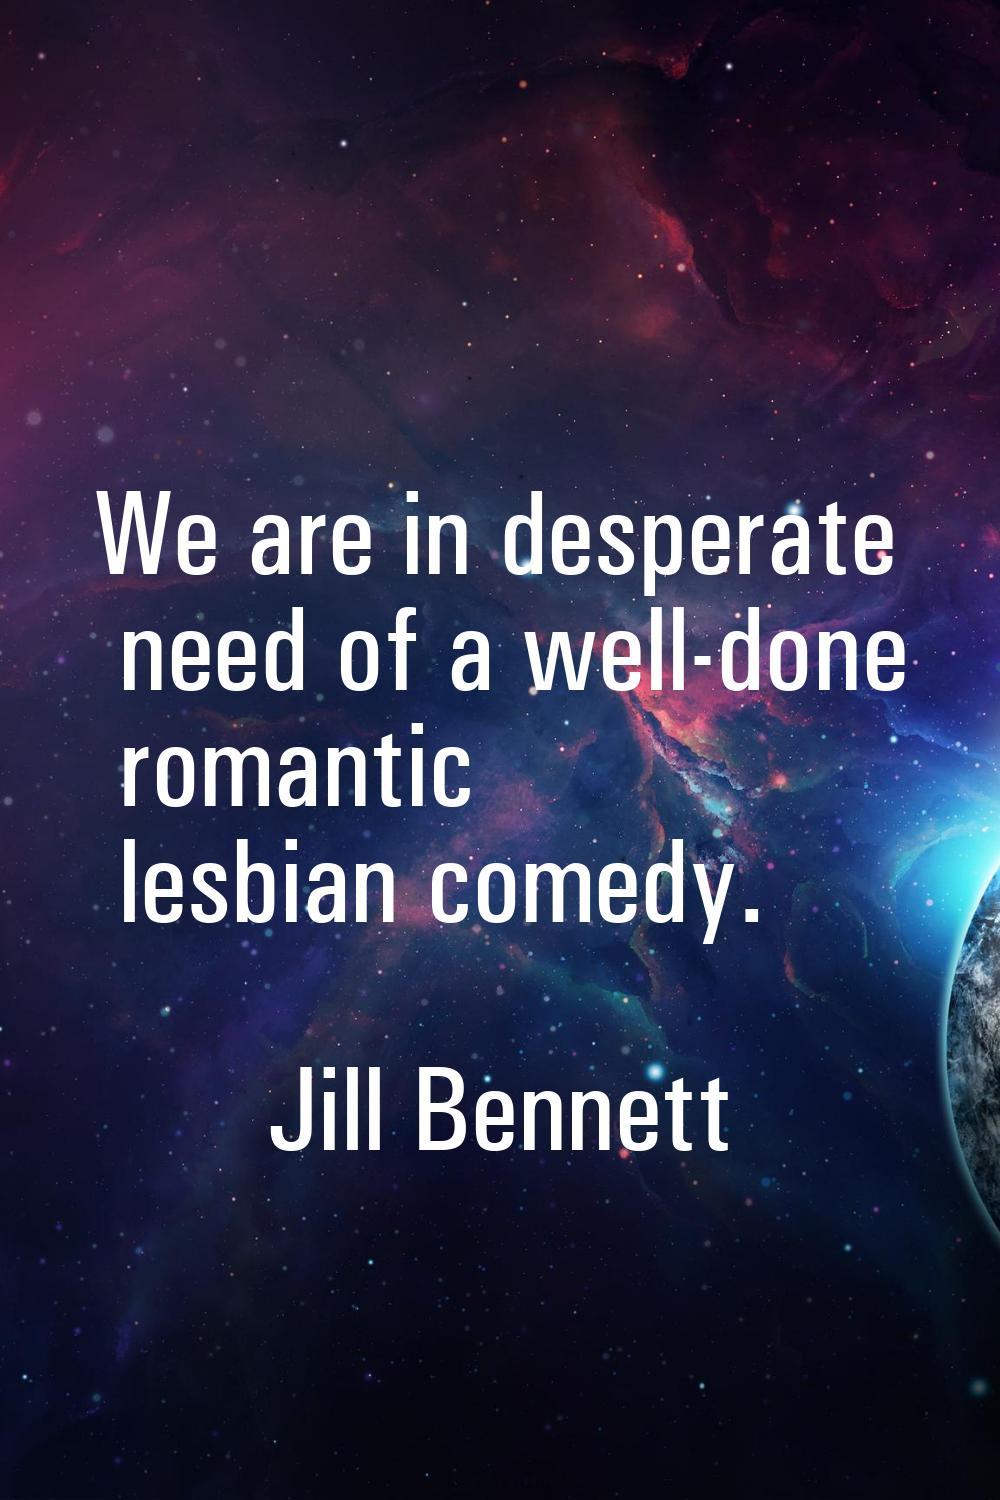 We are in desperate need of a well-done romantic lesbian comedy.